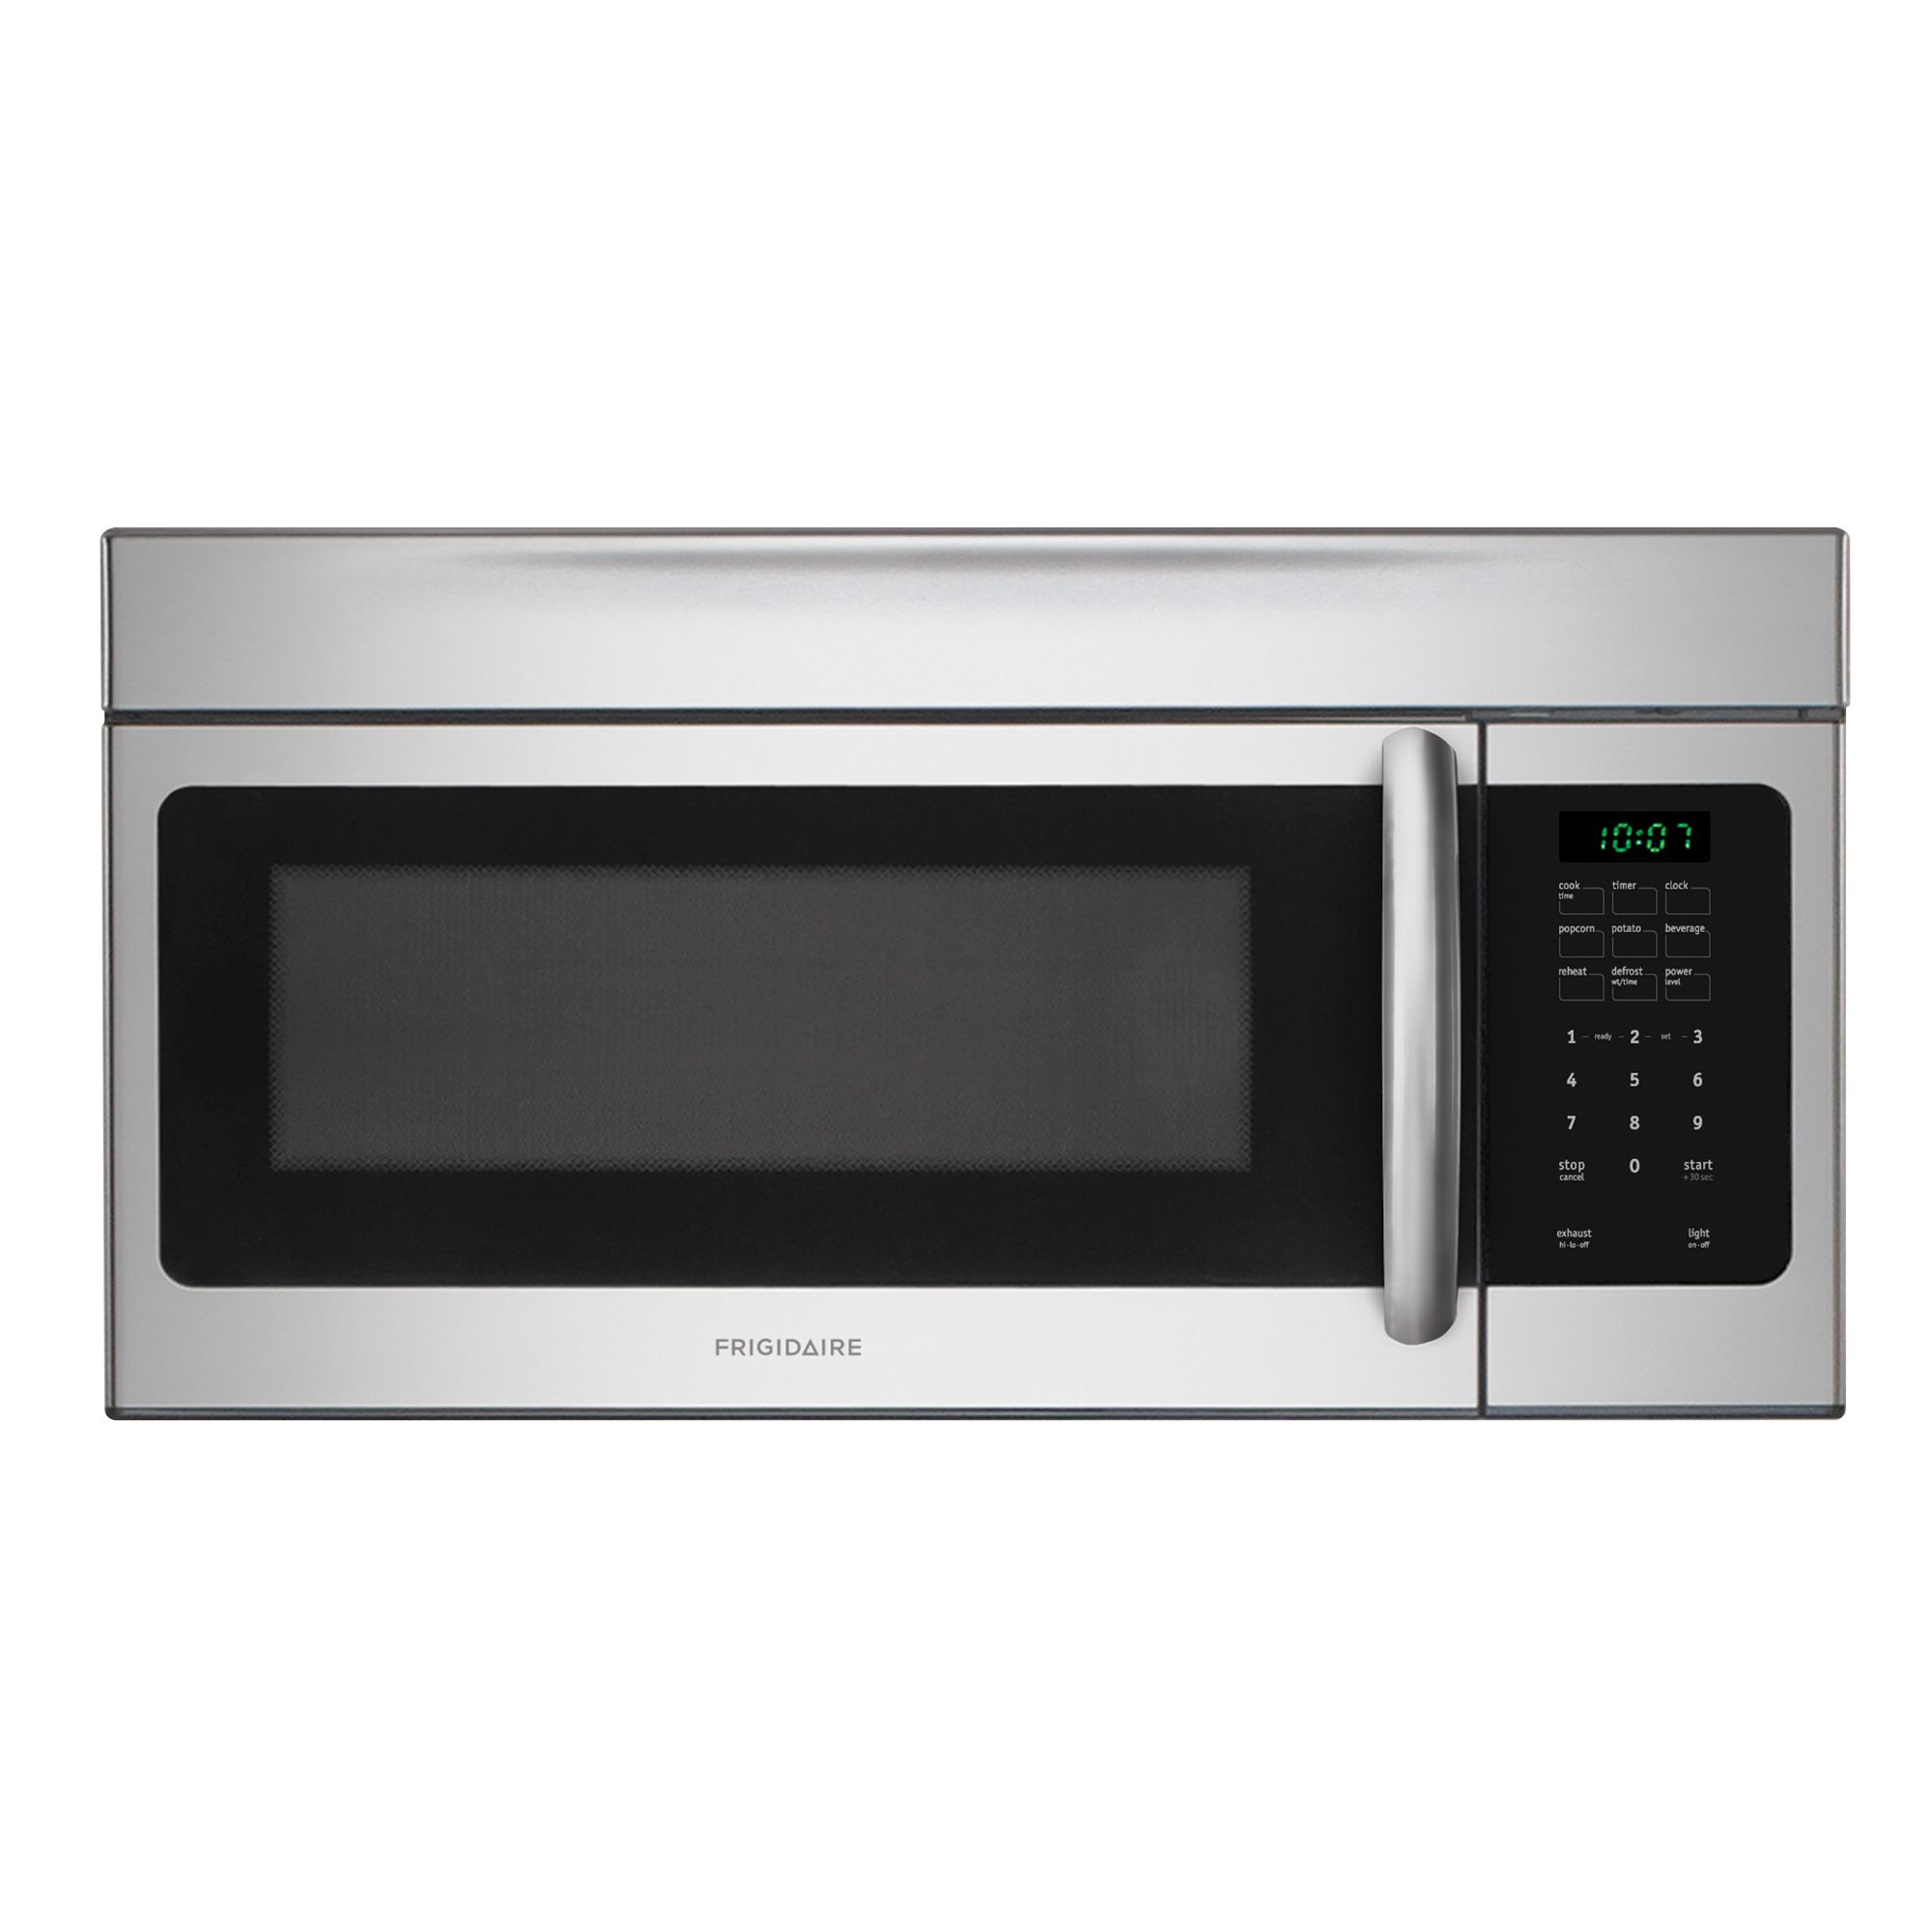 Frigidaire FFMV164LS Microwave, Over-the-Range, 1.6 cu. ft., Stainless